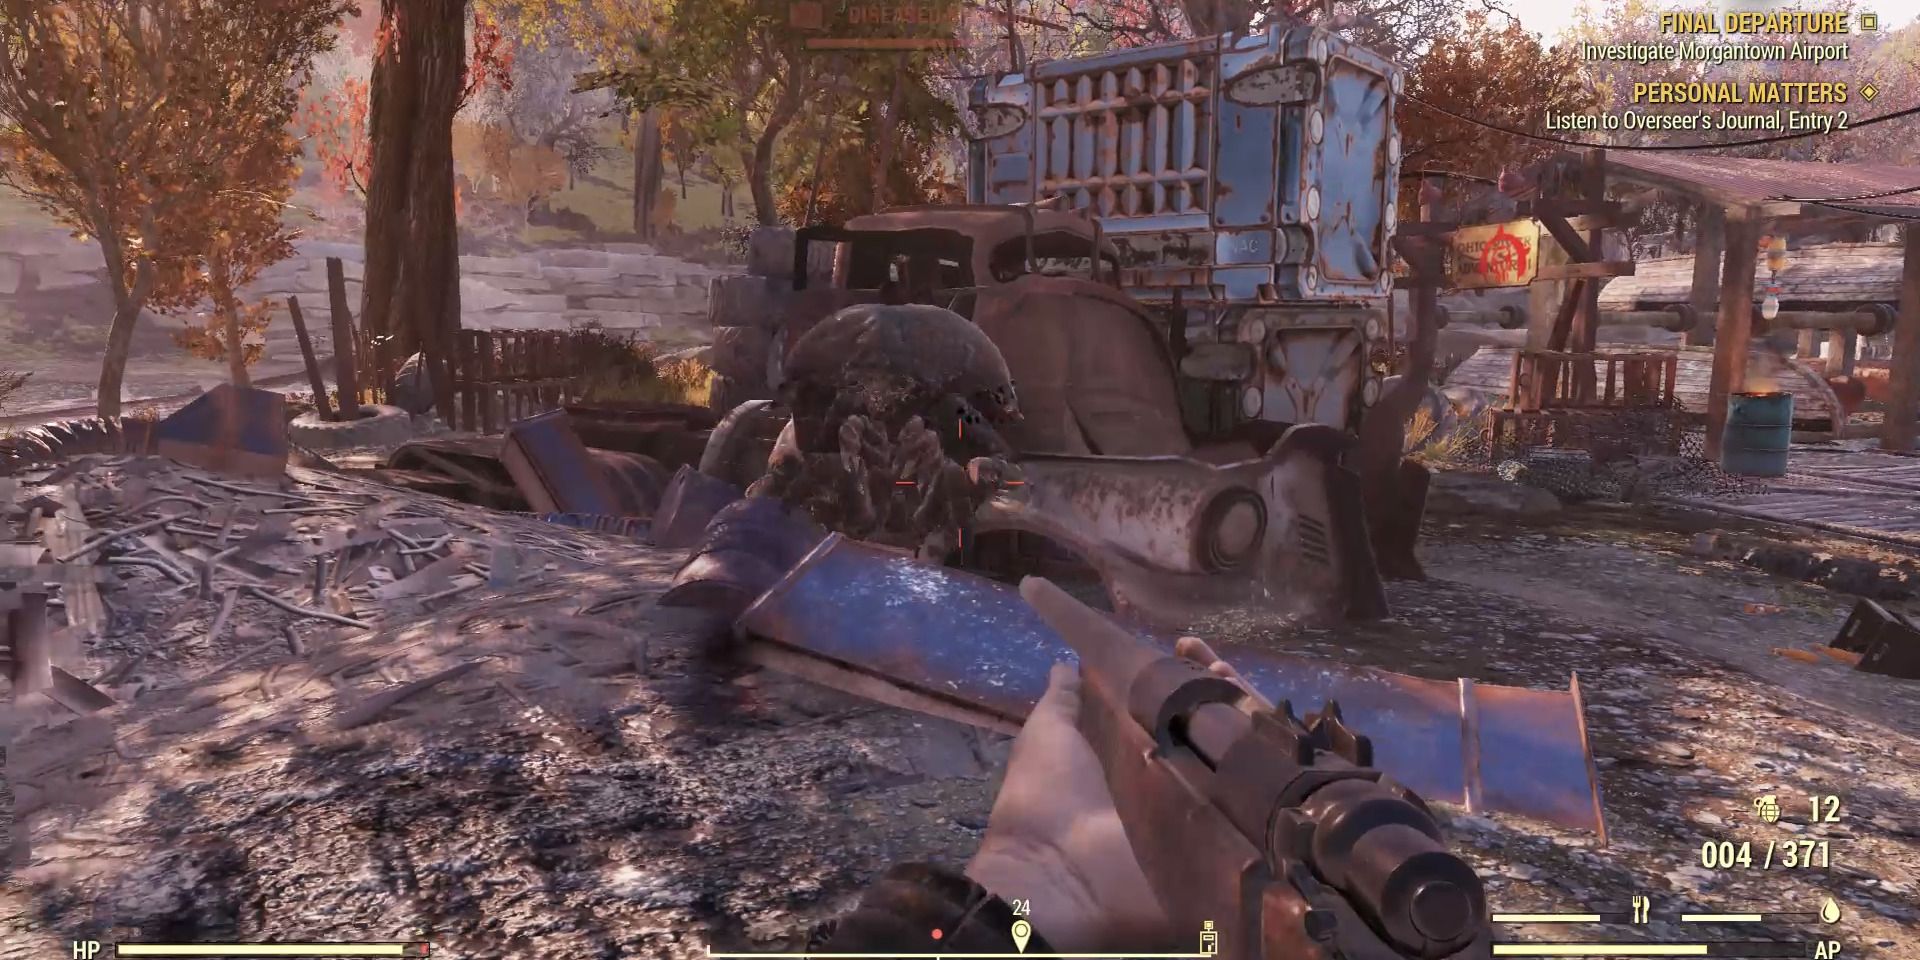 Image of a mirelurk enemy in Fallout 76